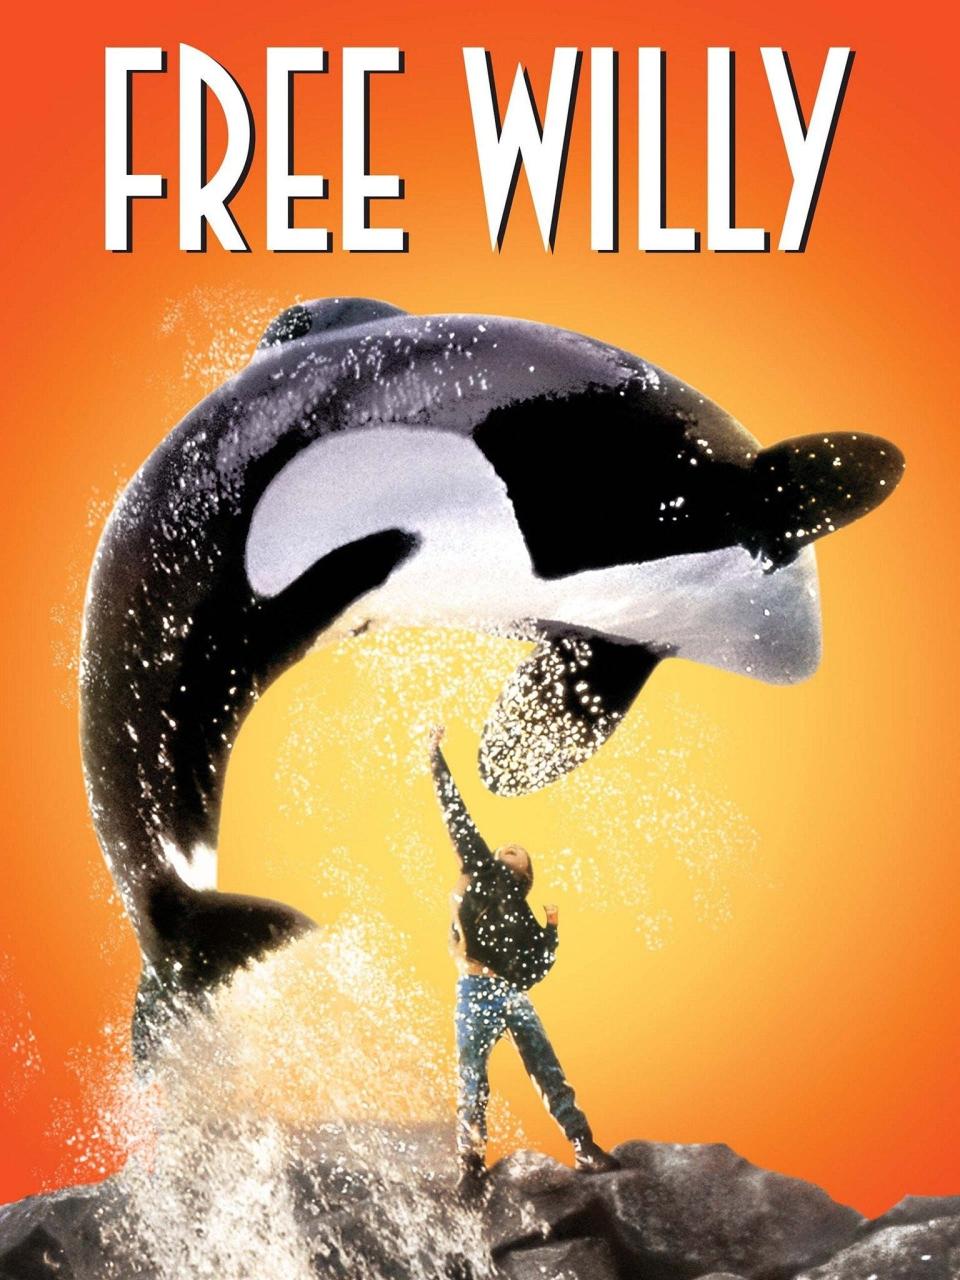 A promotional poster for the move Free Willy release in 1993.